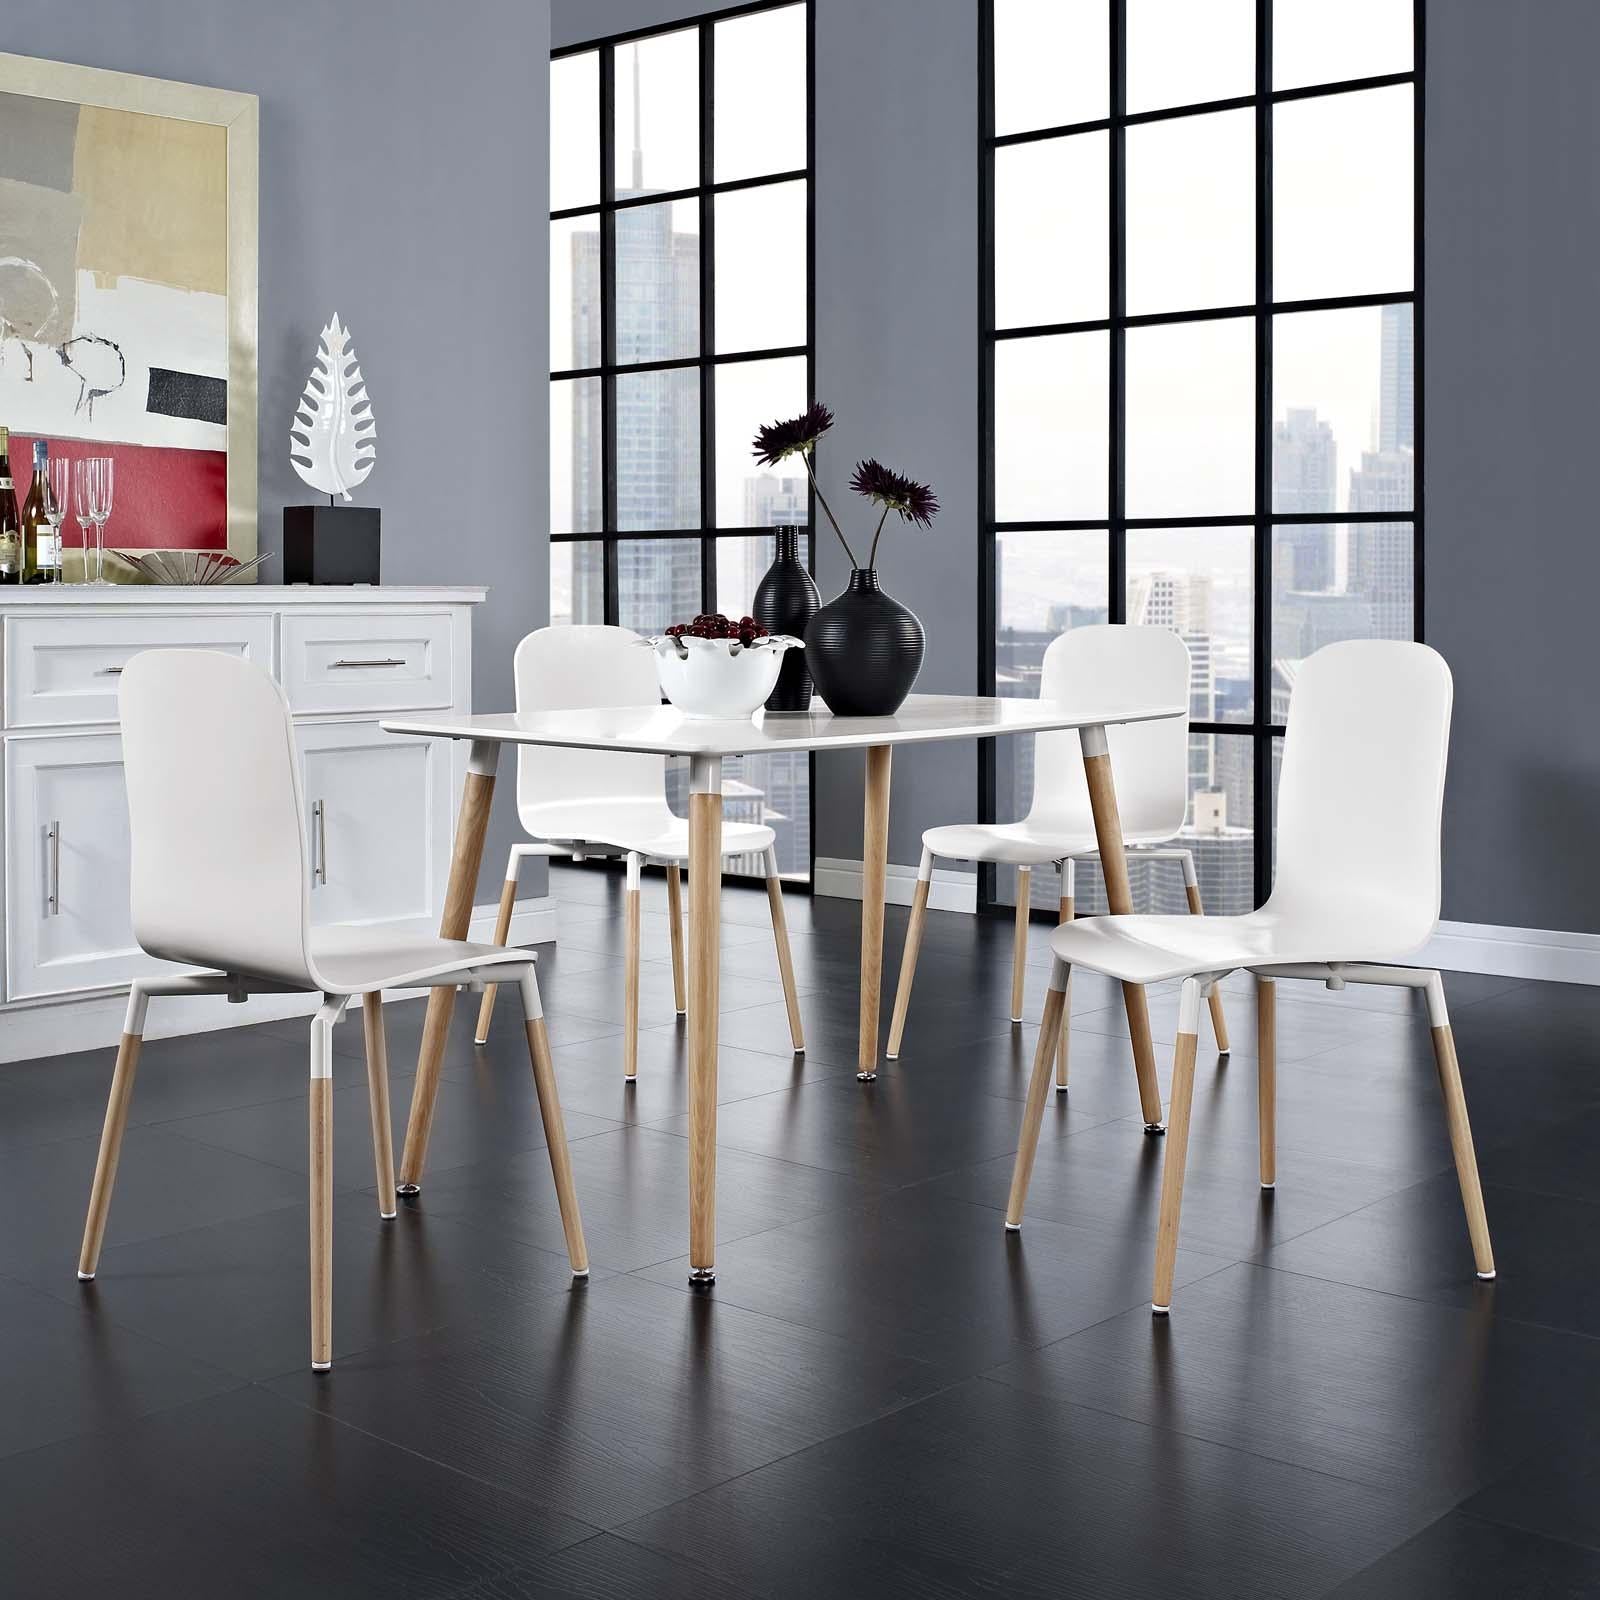 Modway Furniture Modern Stack Dining Chairs Wood Set of 4 - EEI-1373